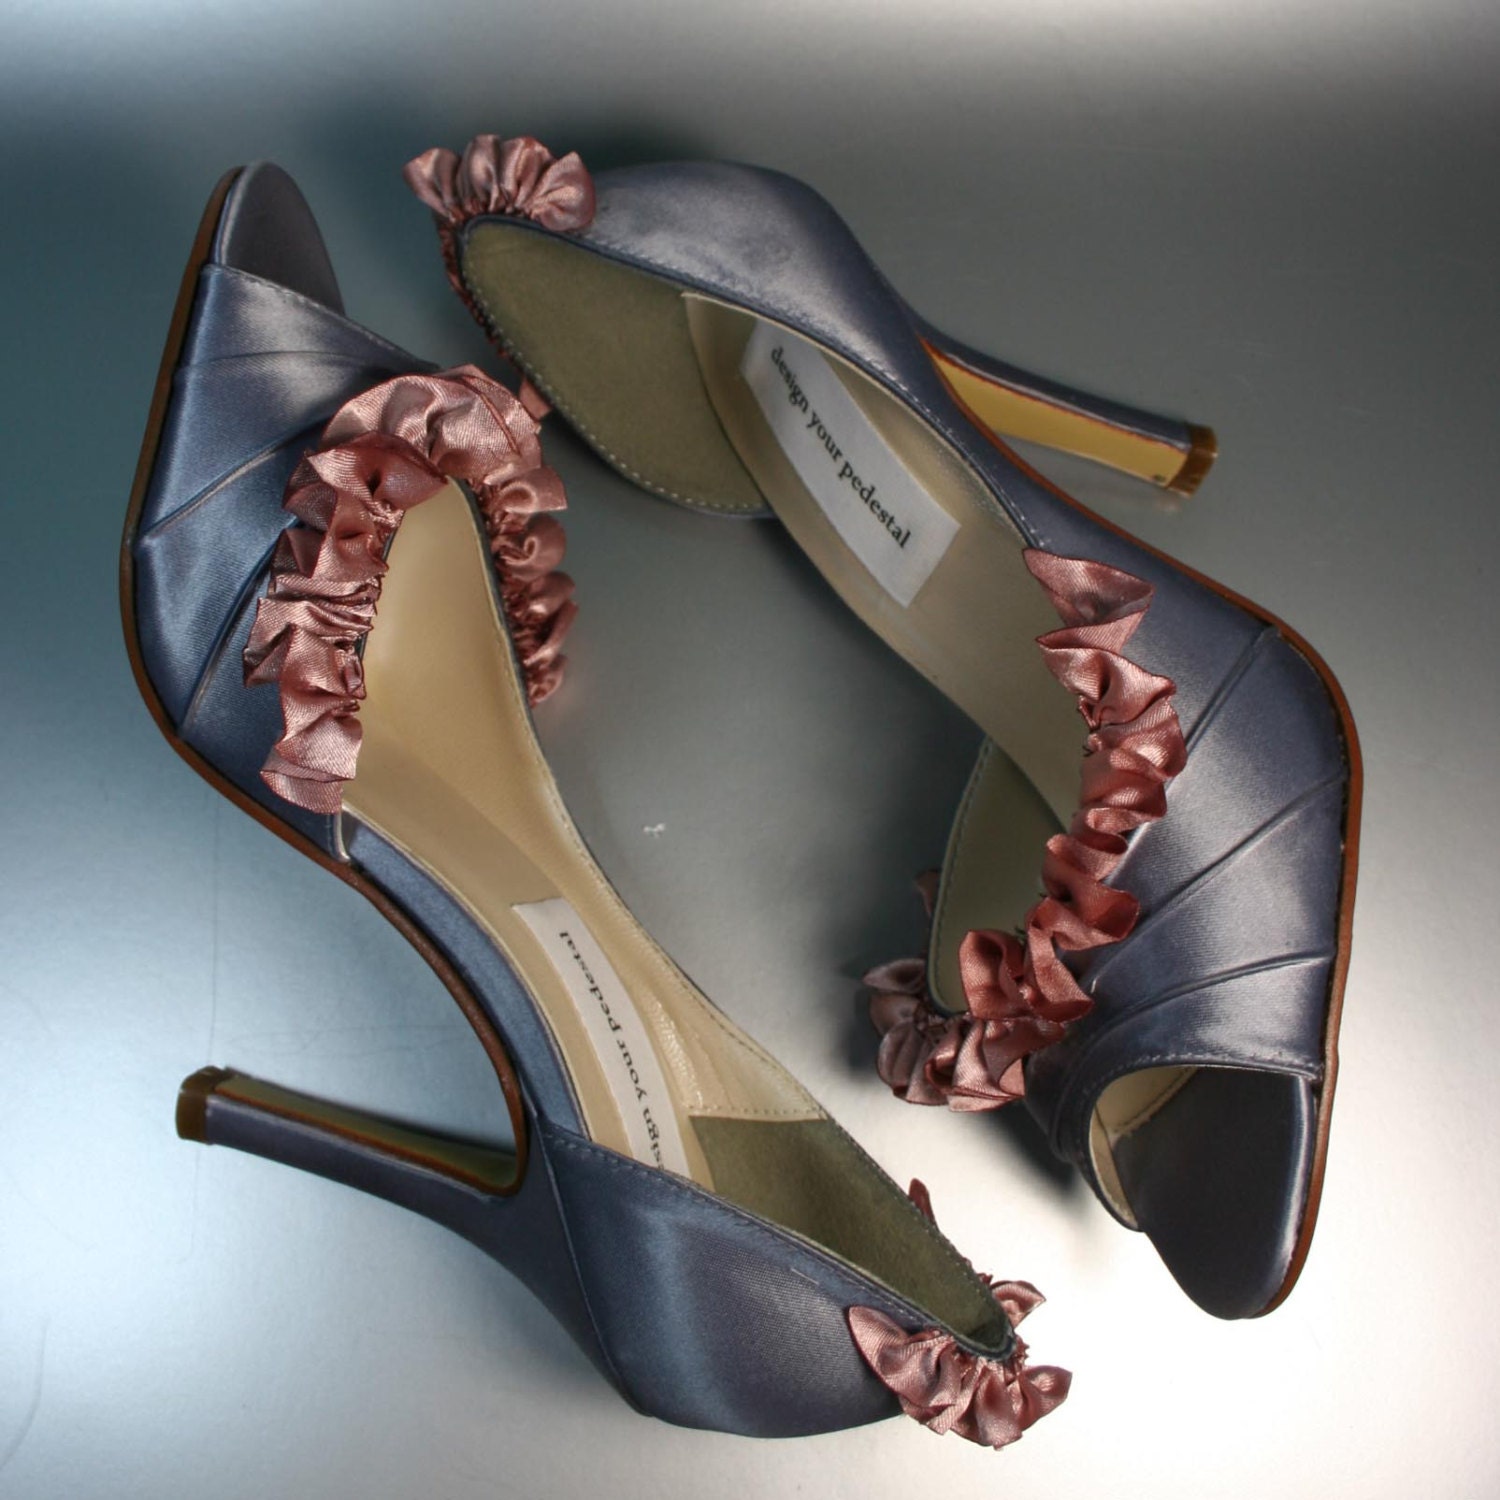 SAMPLE SALE Wedding Shoes -- Gray Peeptoes with Antique Pink Ruffle -- SIZE 6.5 Only - DesignYourPedestal